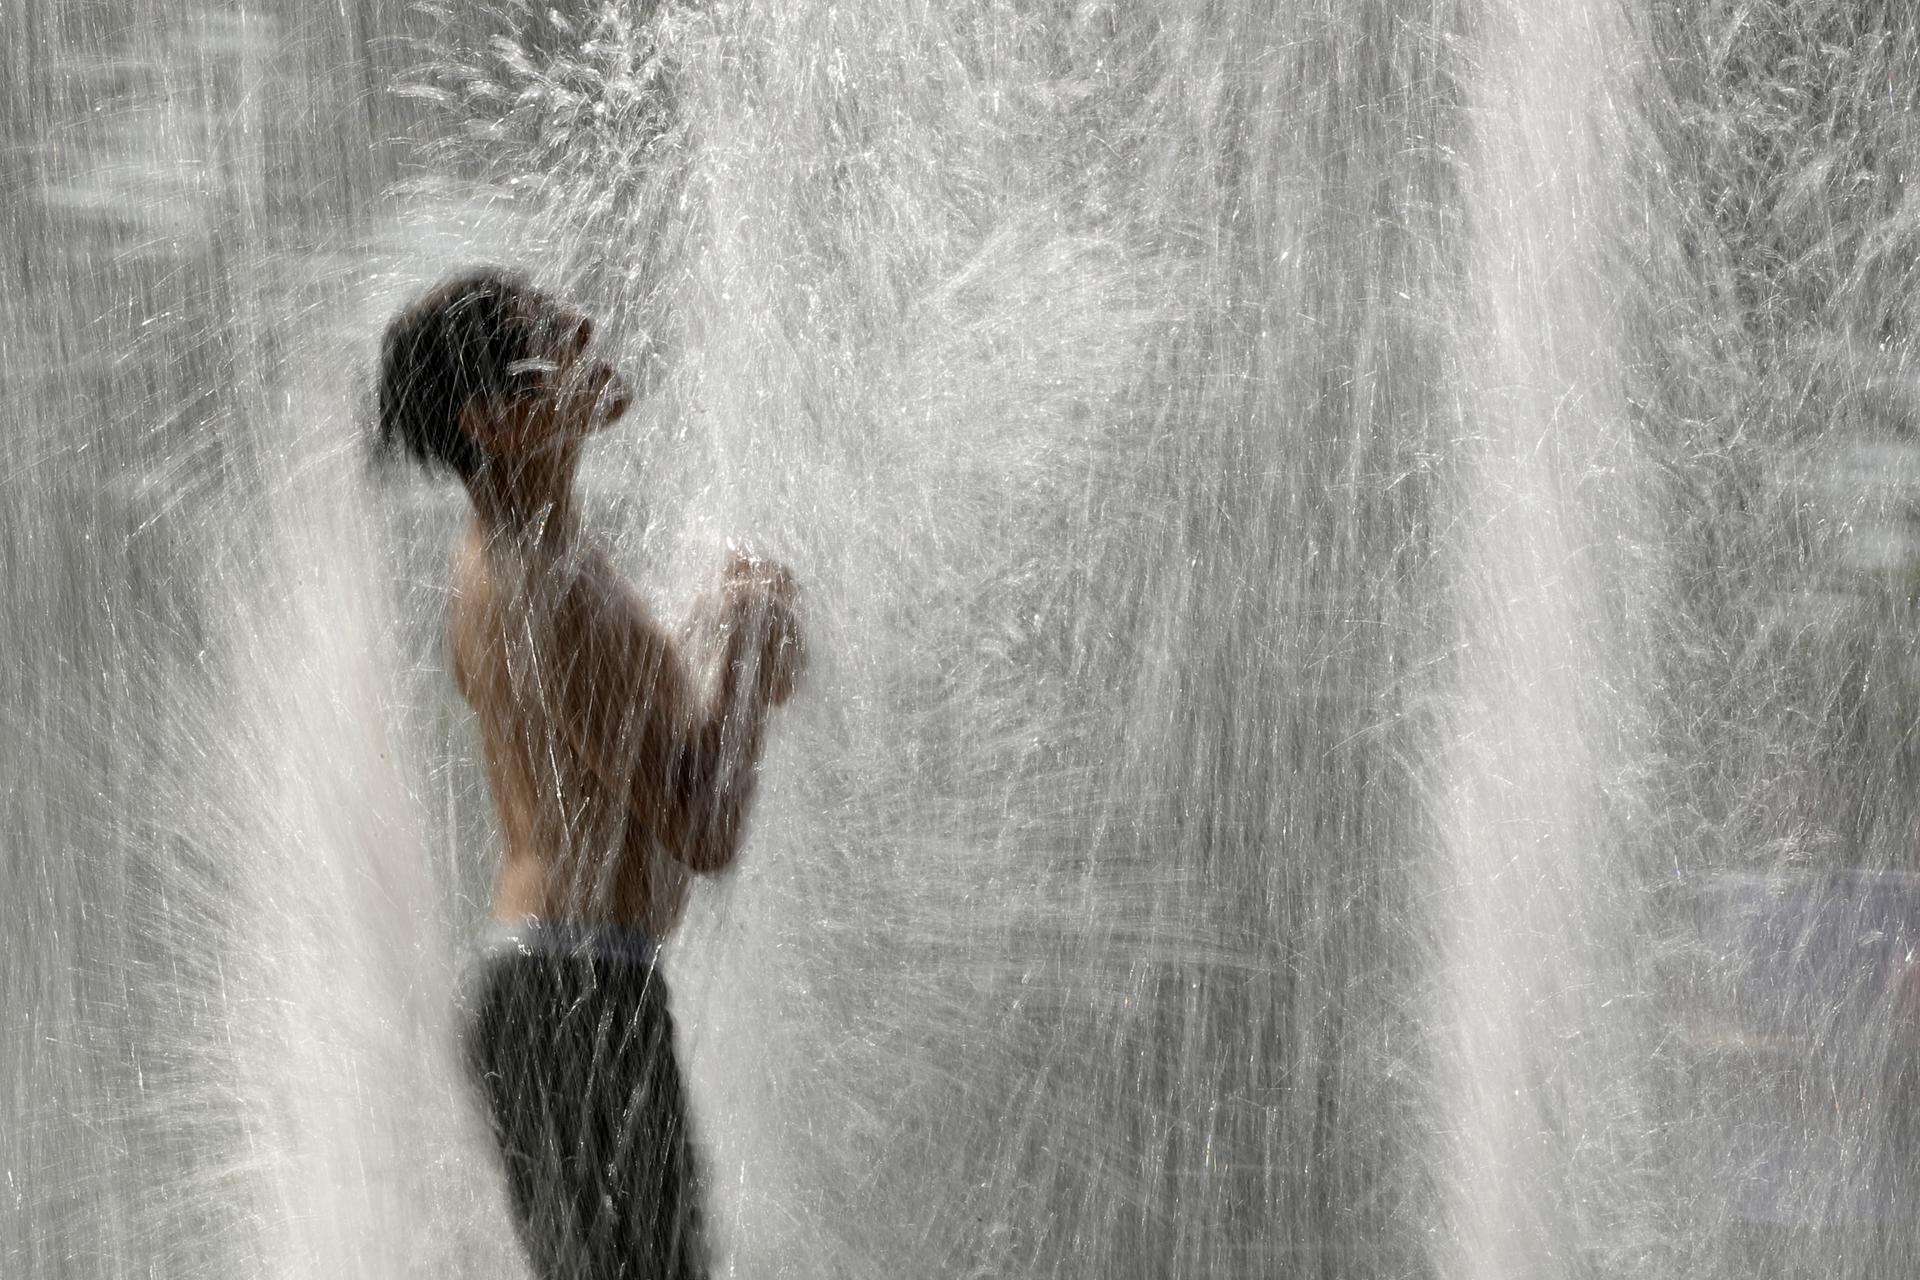 A boy plays in a fountain to cool off as temperatures approach 100 degrees Fahrenheit, July 18, 2019, in Kansas City, Missouri. 